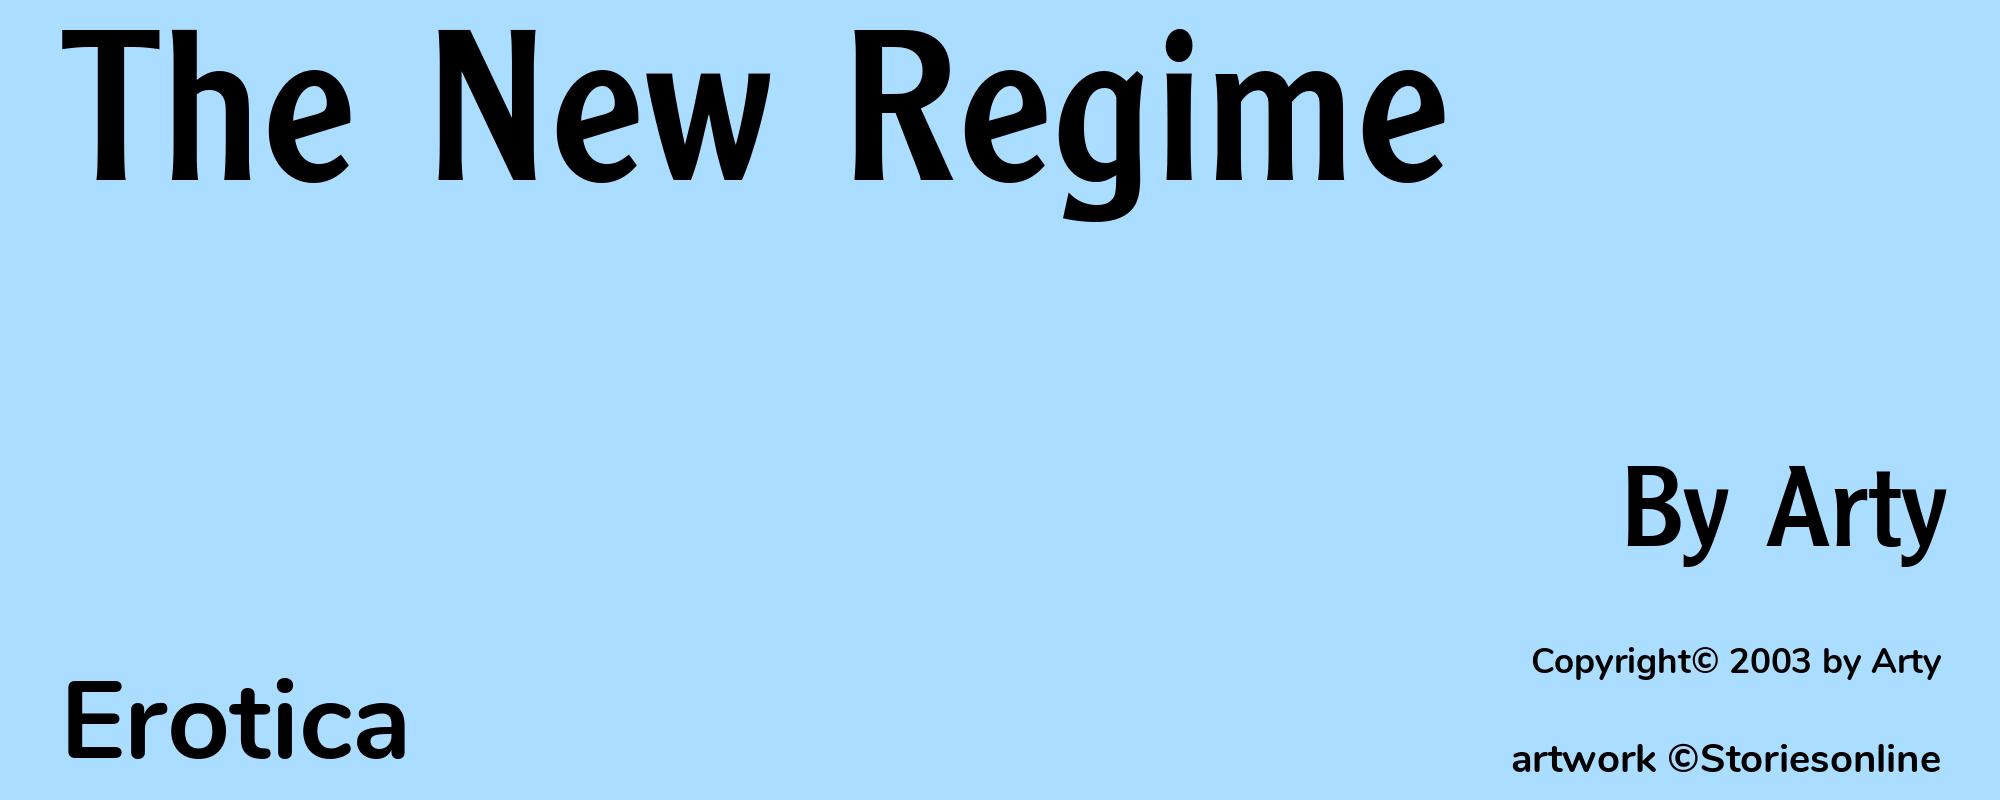 The New Regime - Cover